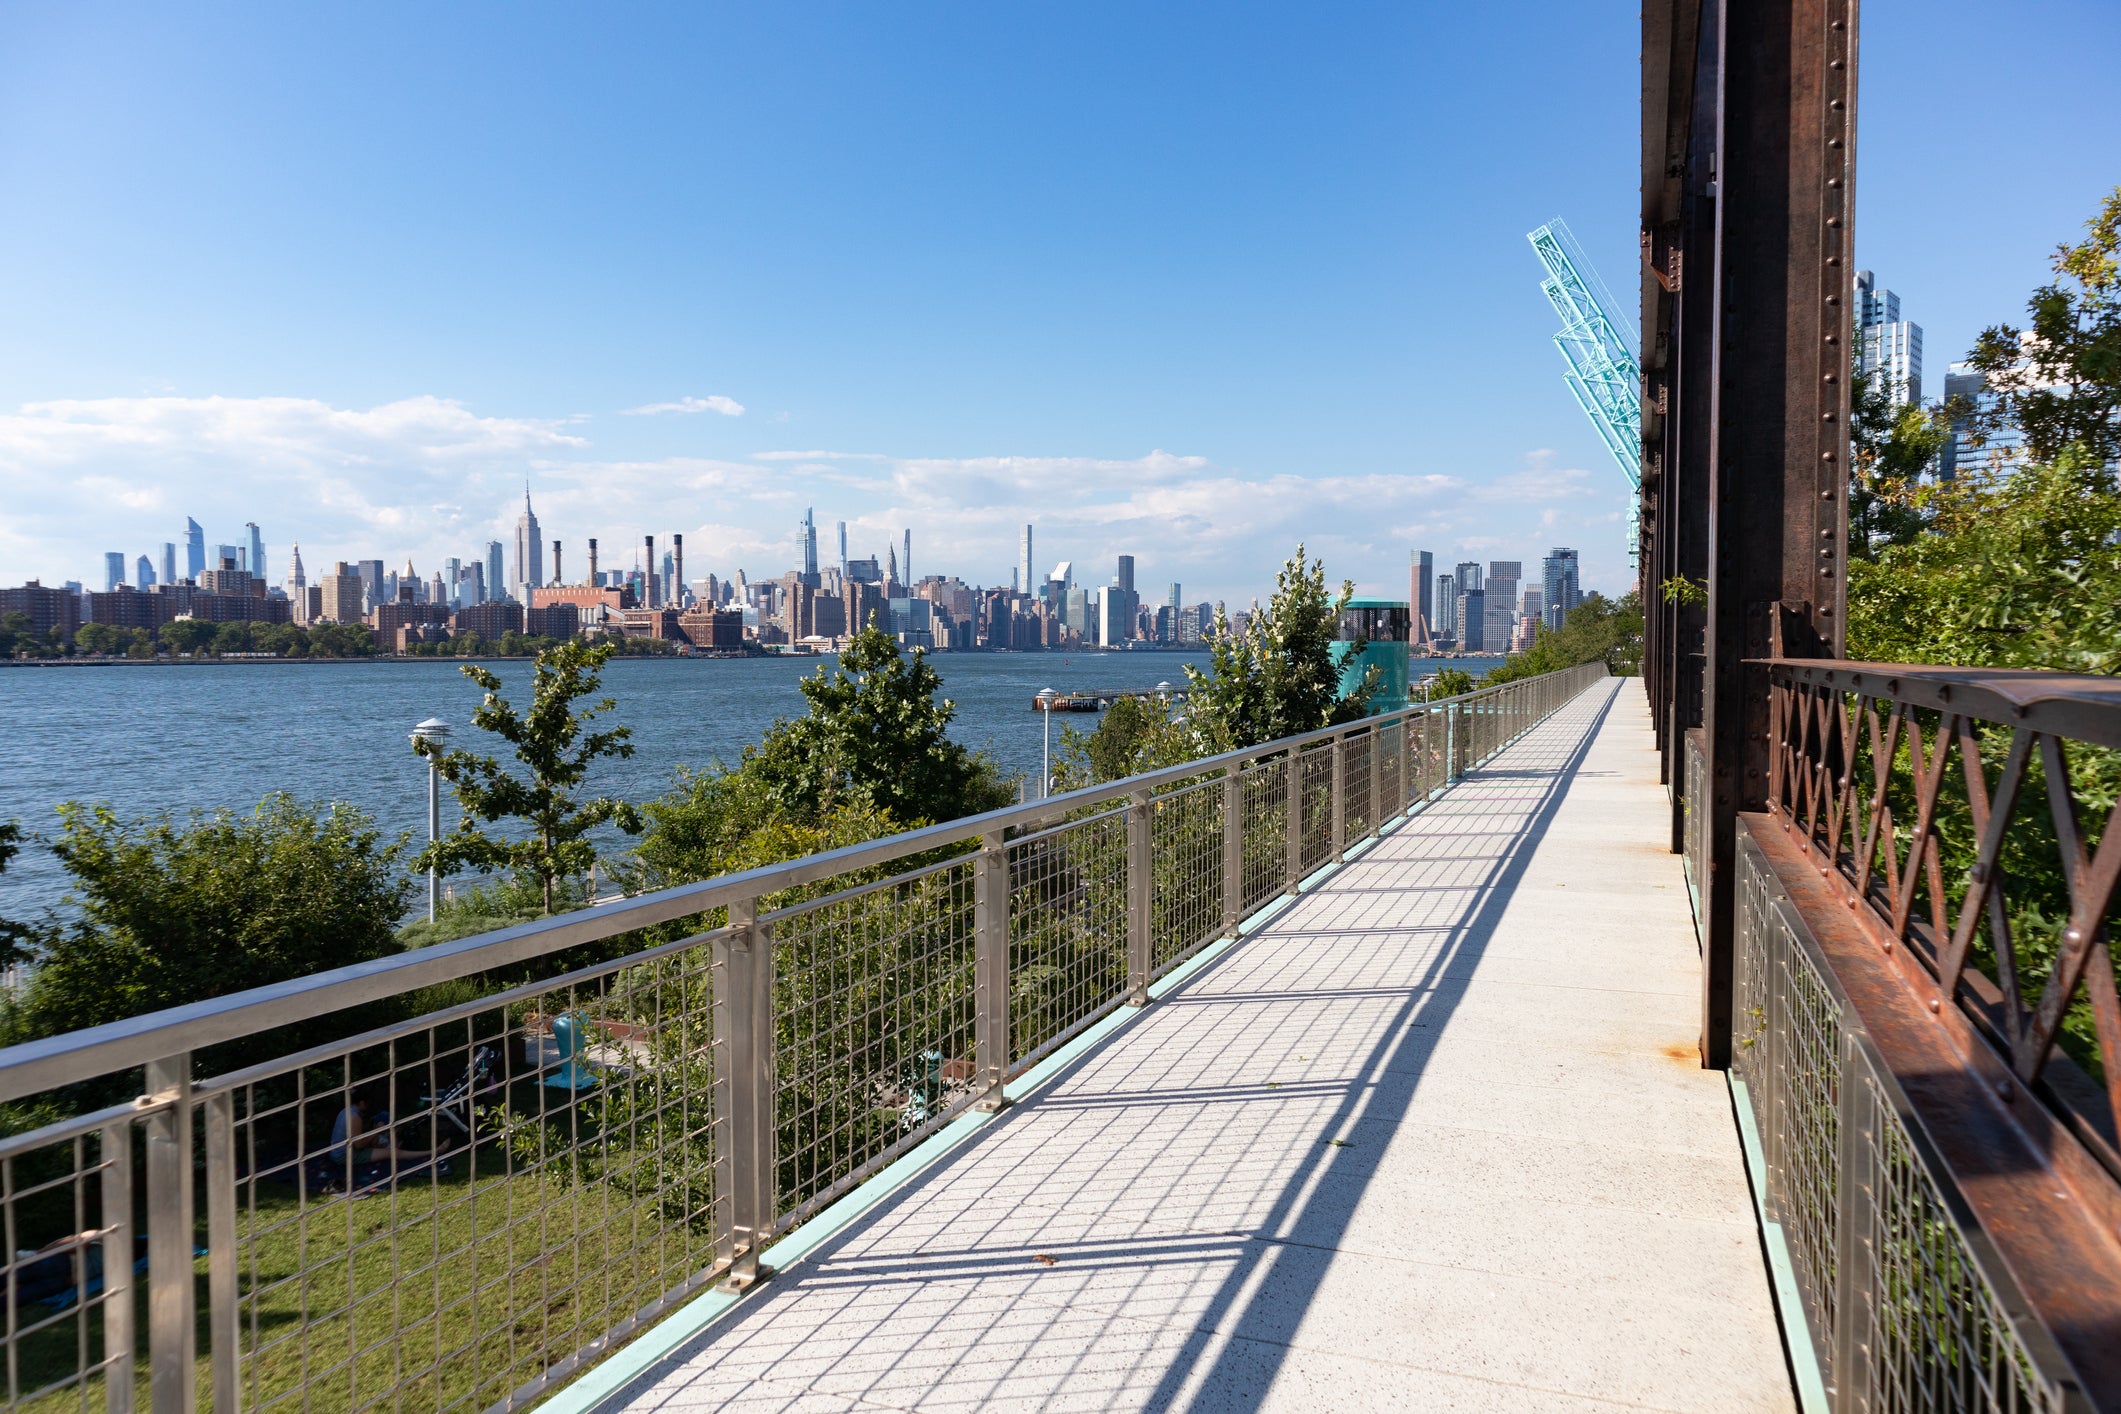 Get to know the neighbourhood with walks along the East River